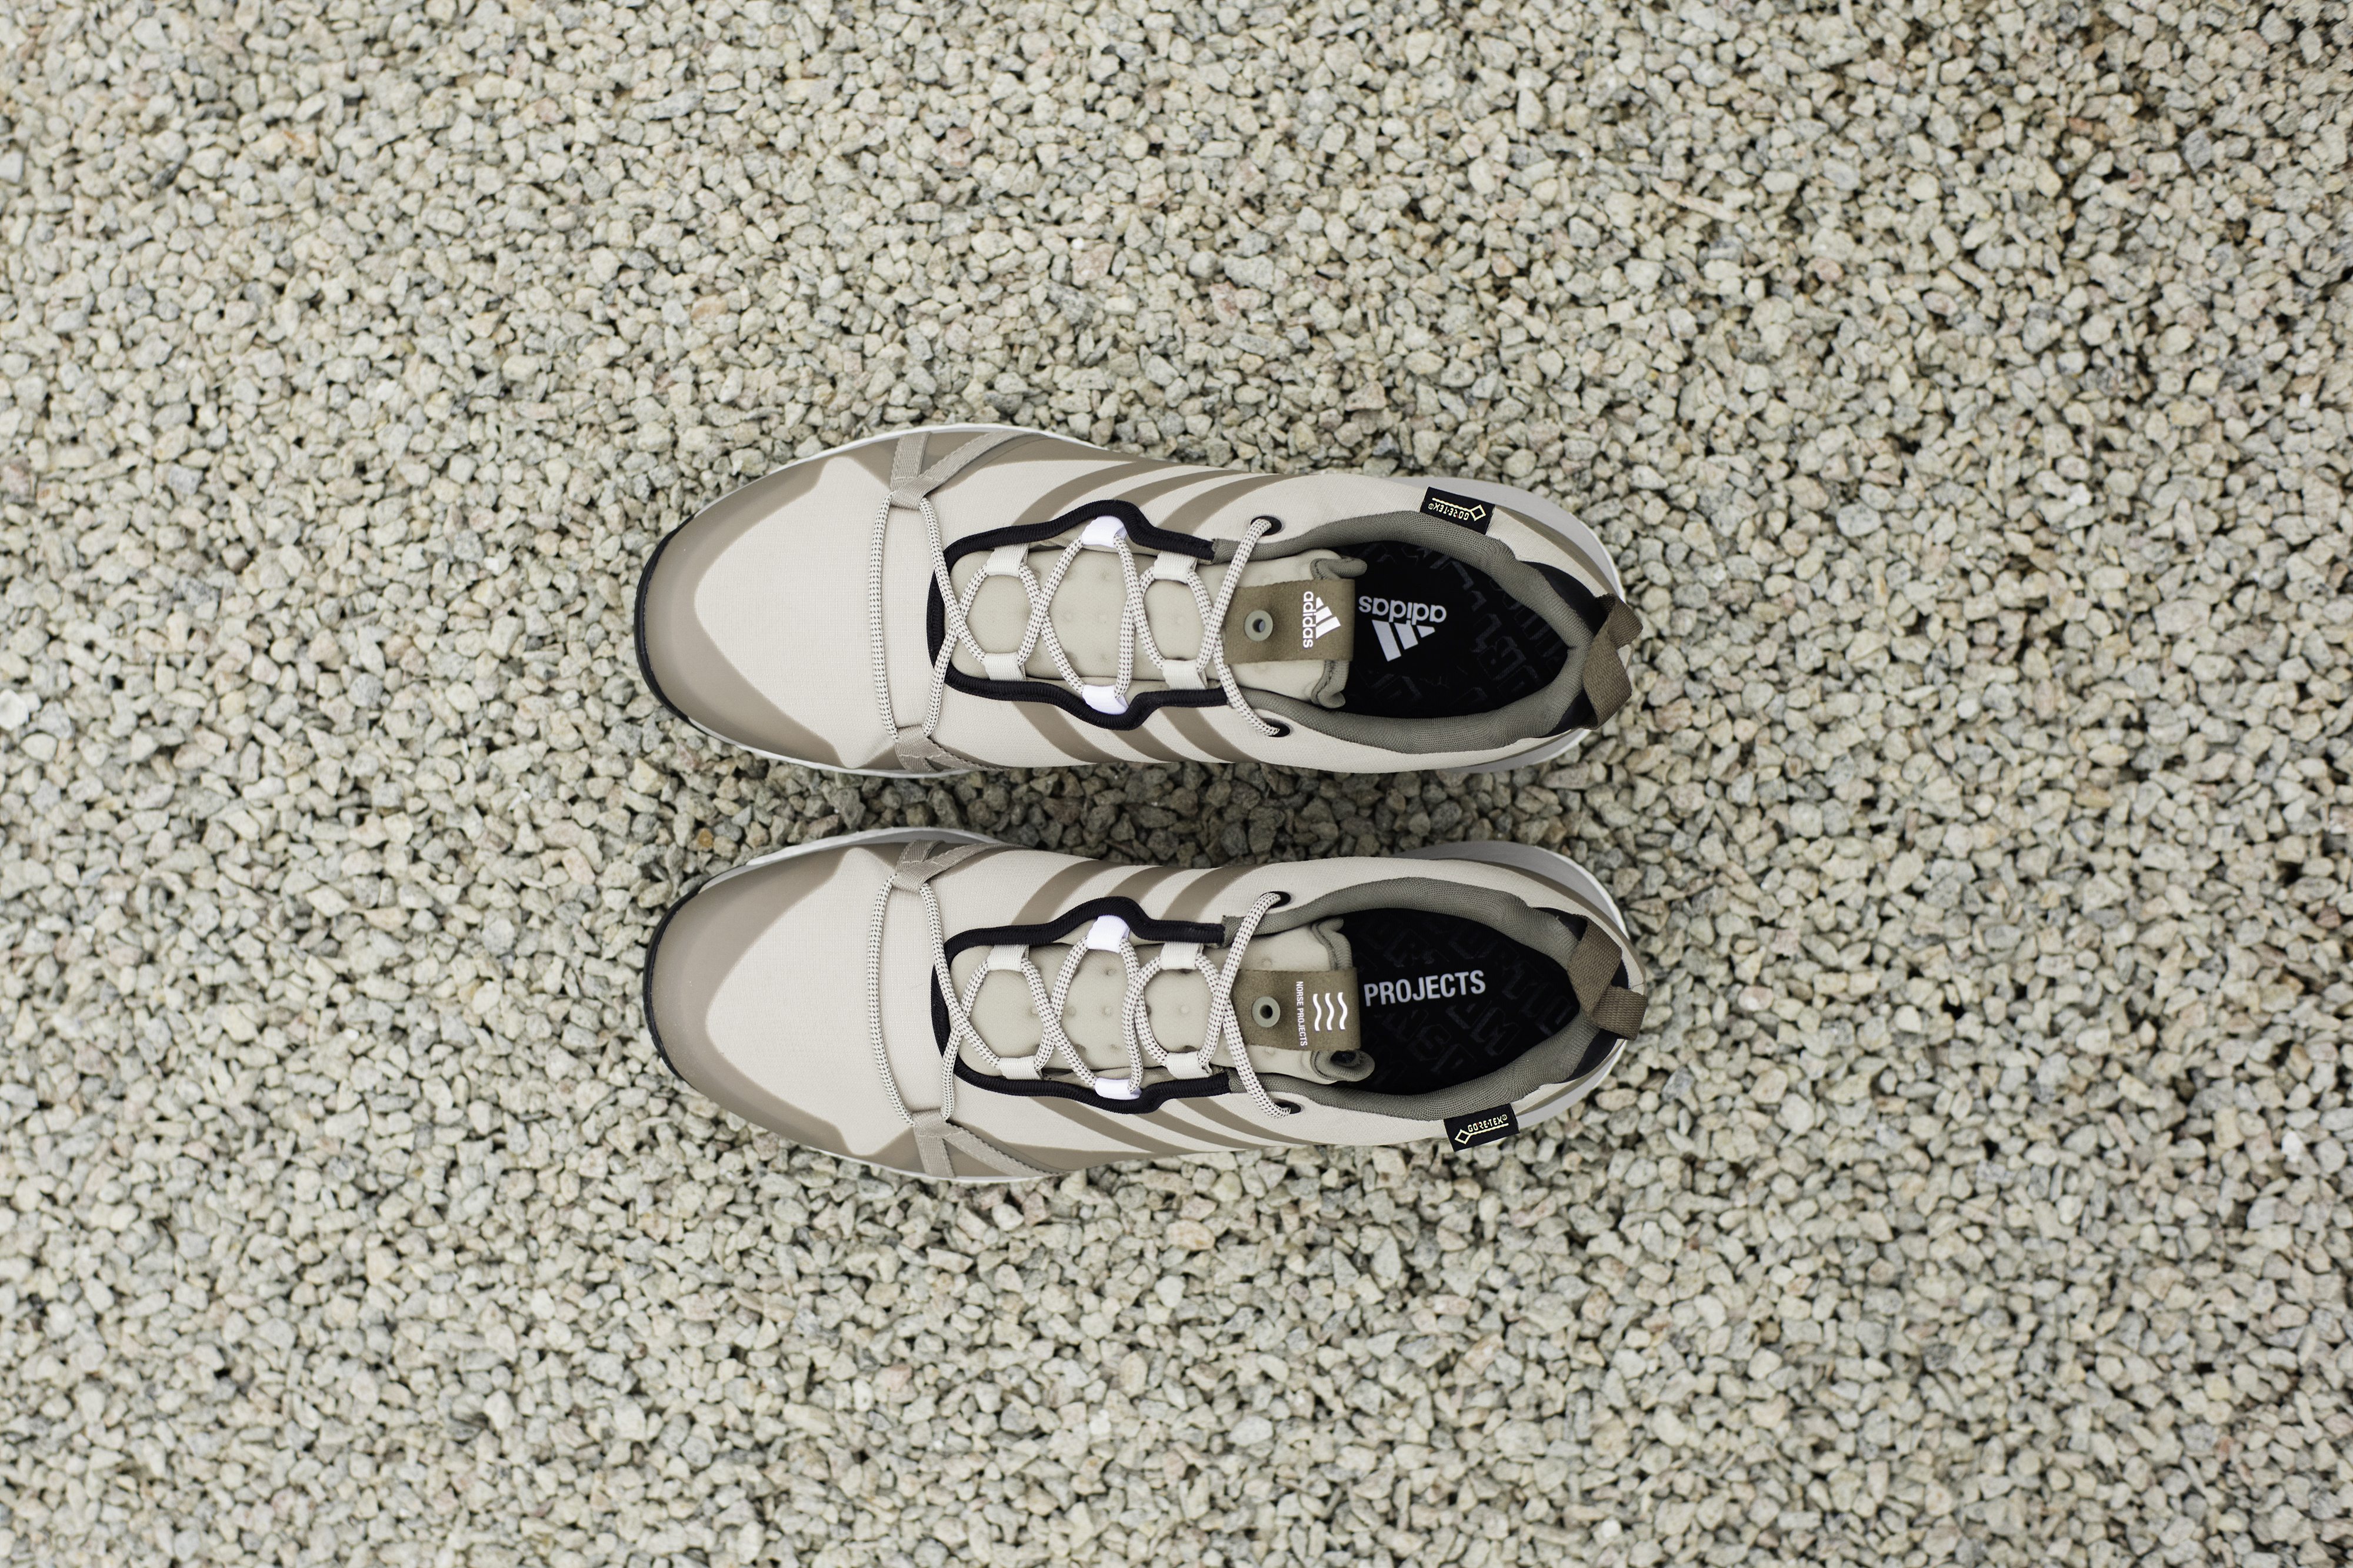 Norse Projects x adidas Consortium "Layers" Pack